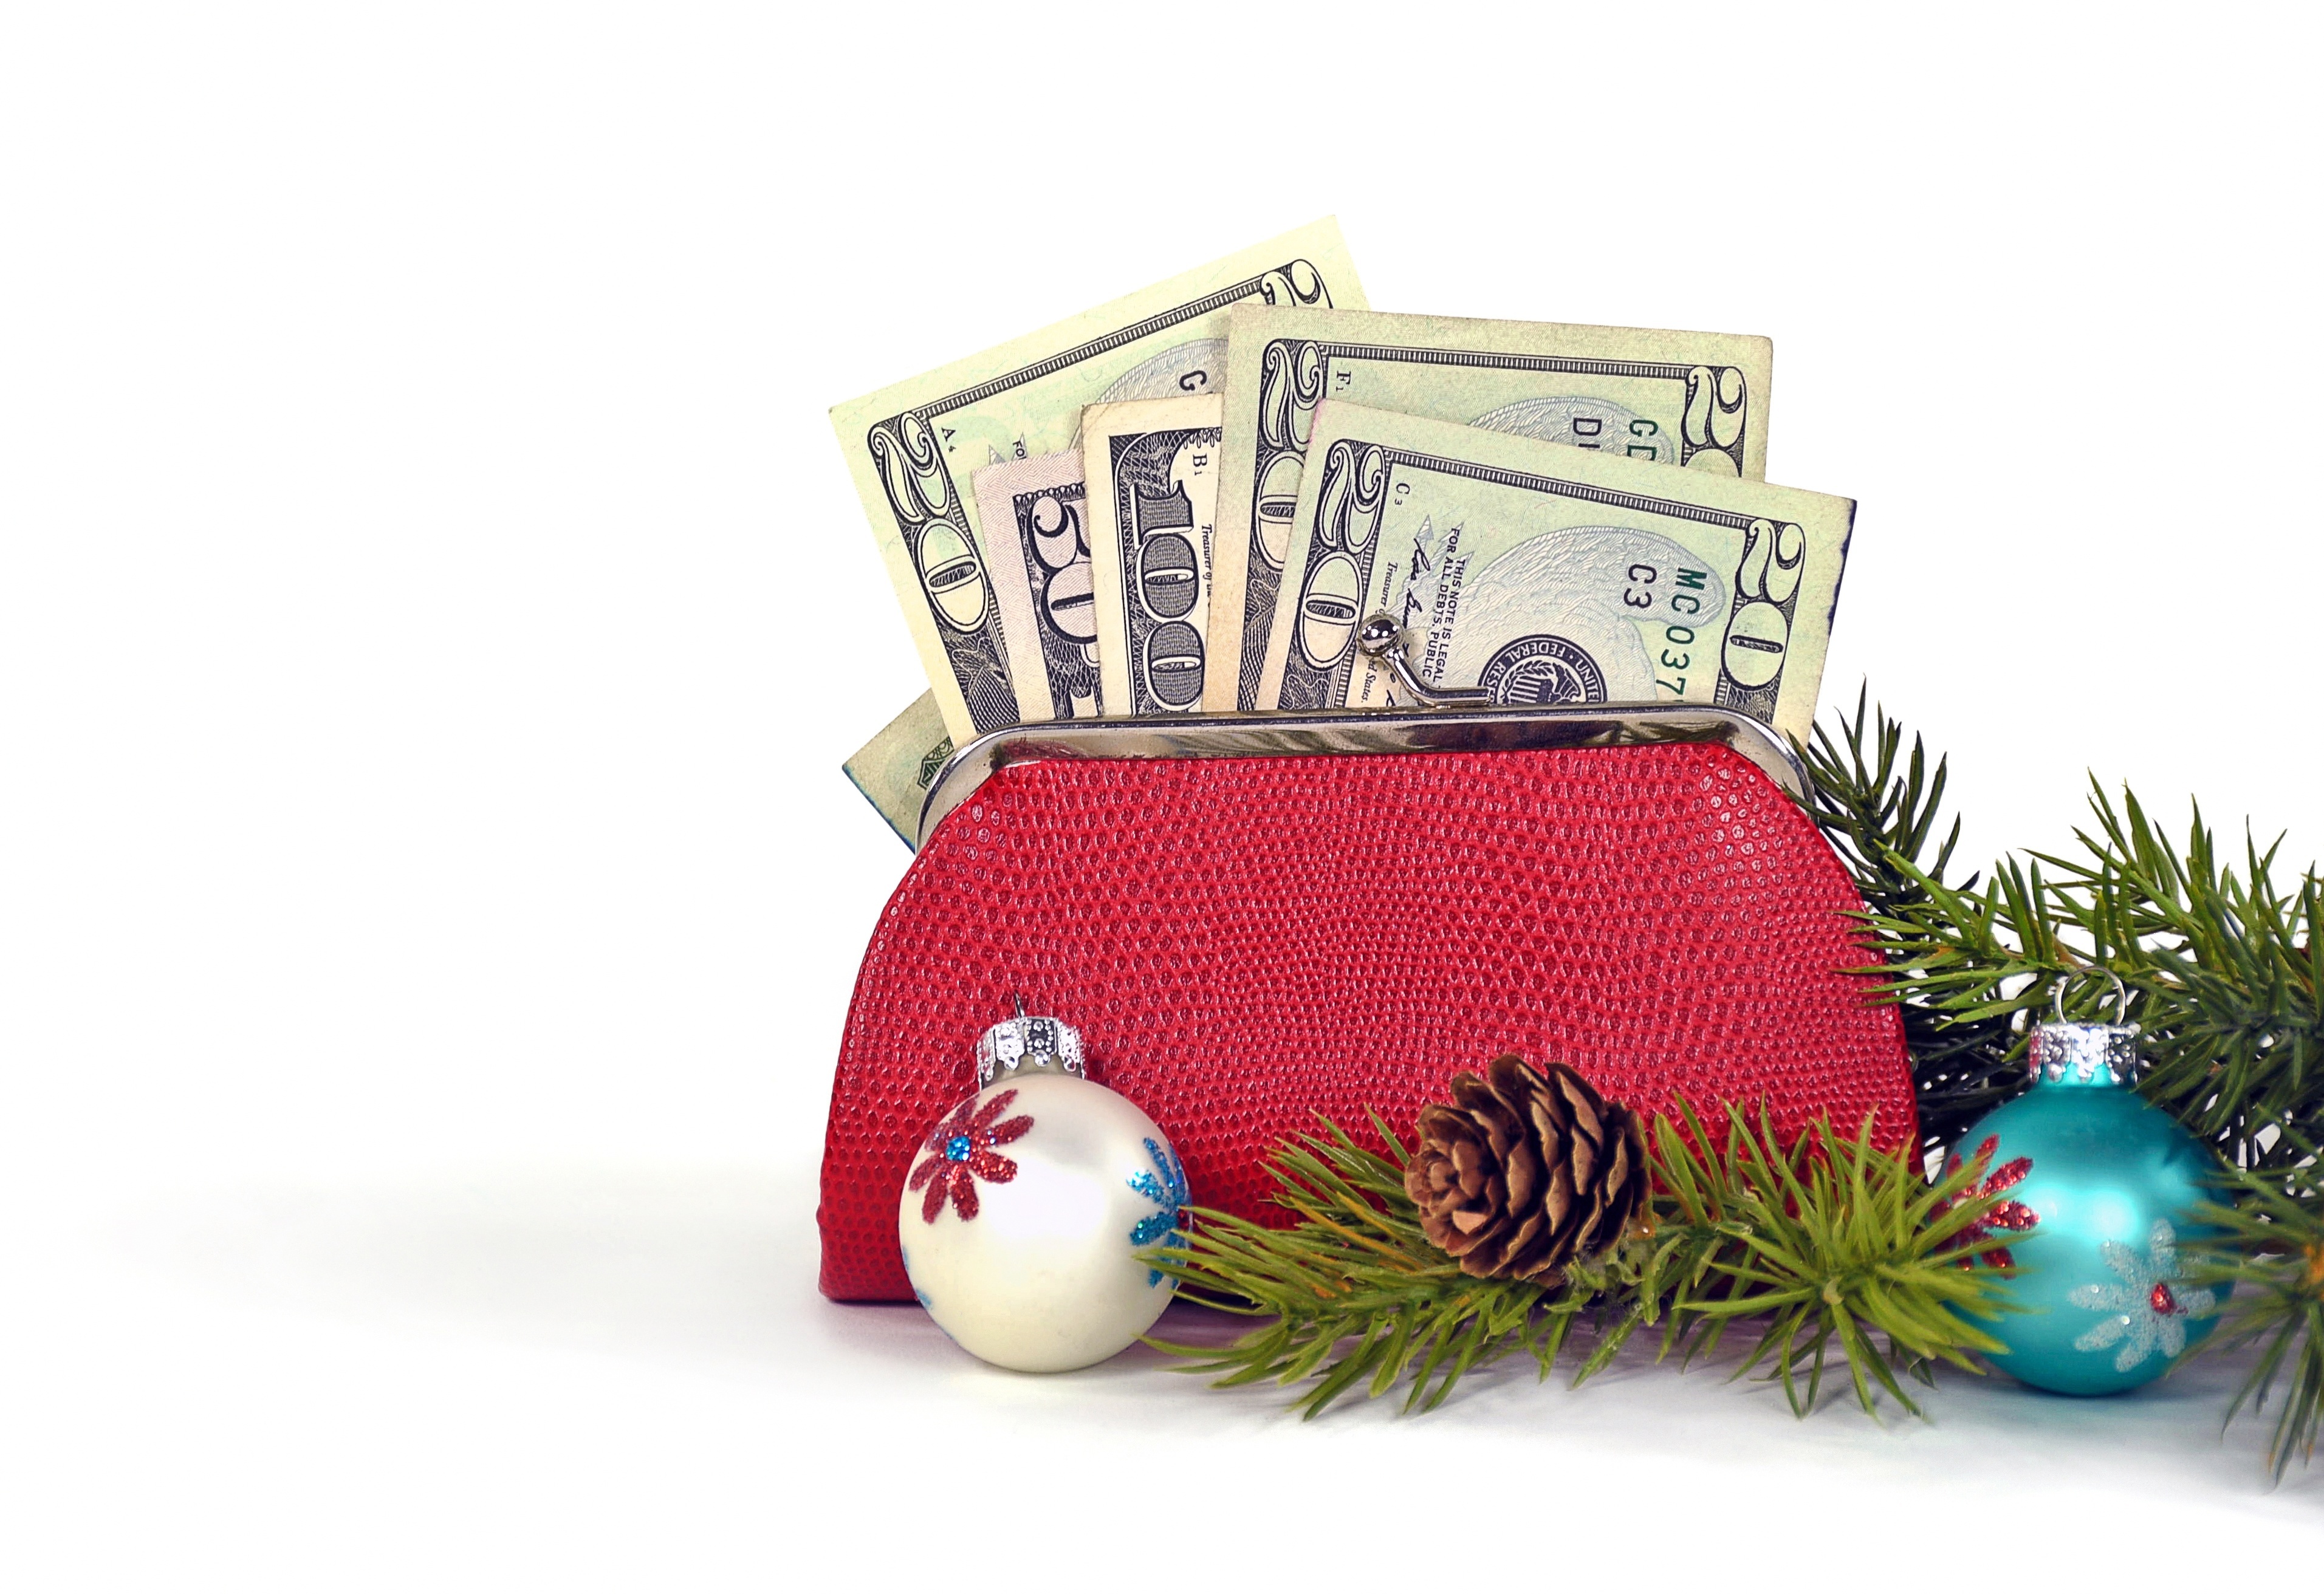 Are You Avoiding Financial Stress During the Most Wonderful Time of the Year?